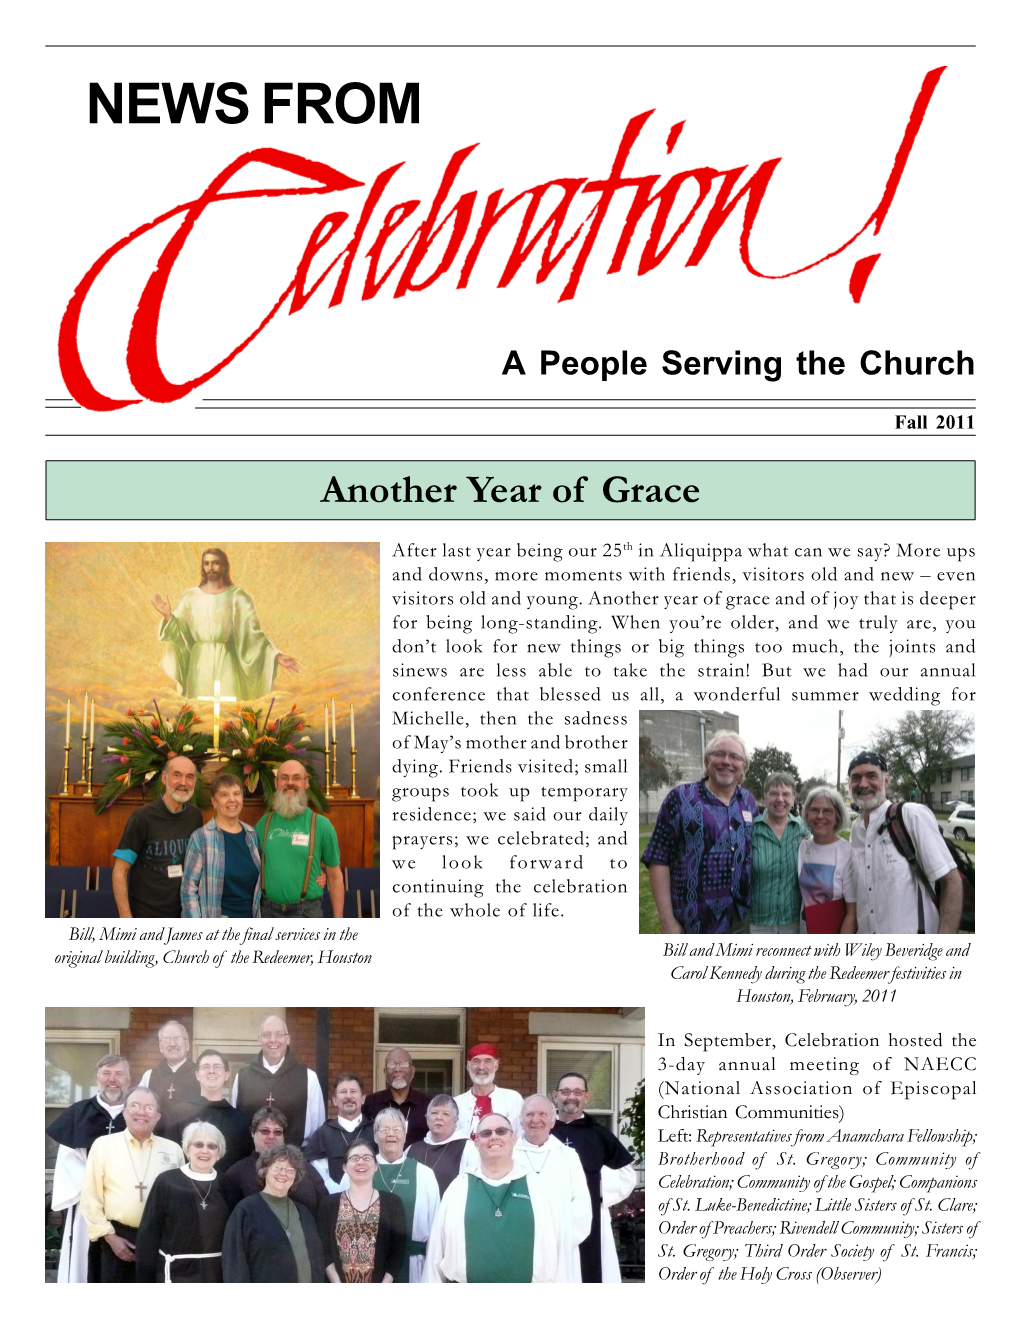 News from Celebration--Fall 2011